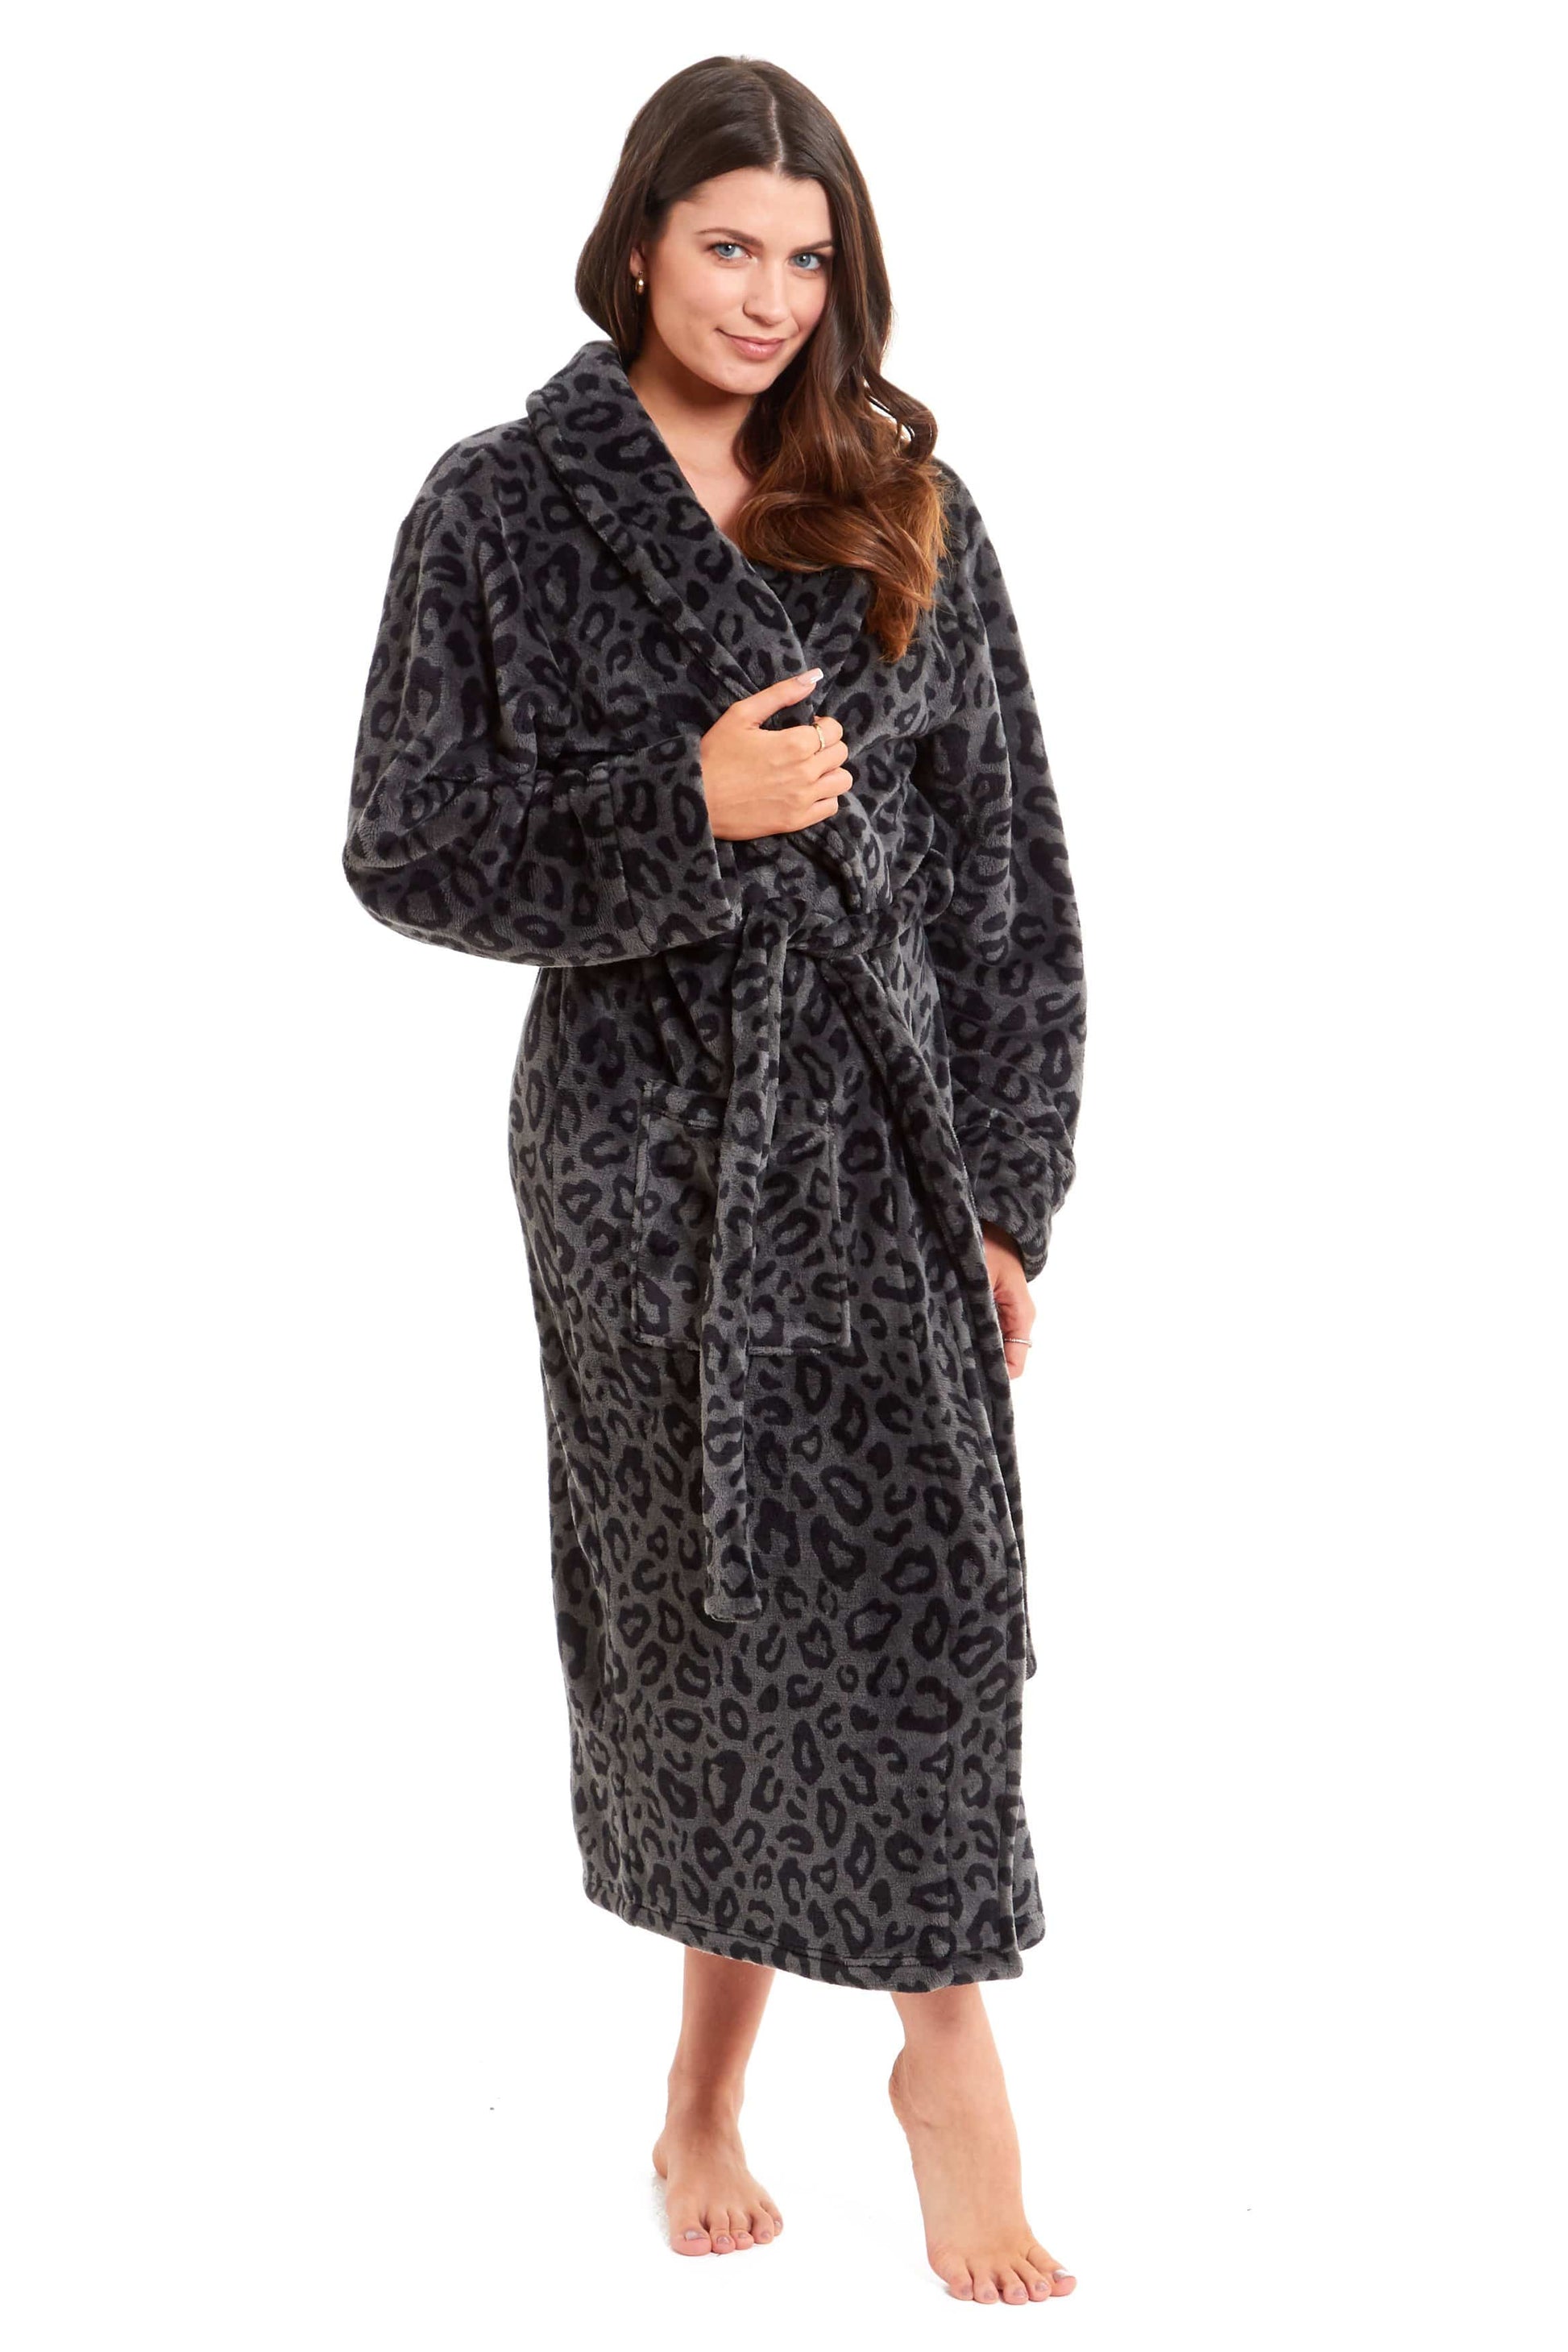 Women's Dressing Gowns | Night Robes | M&Co